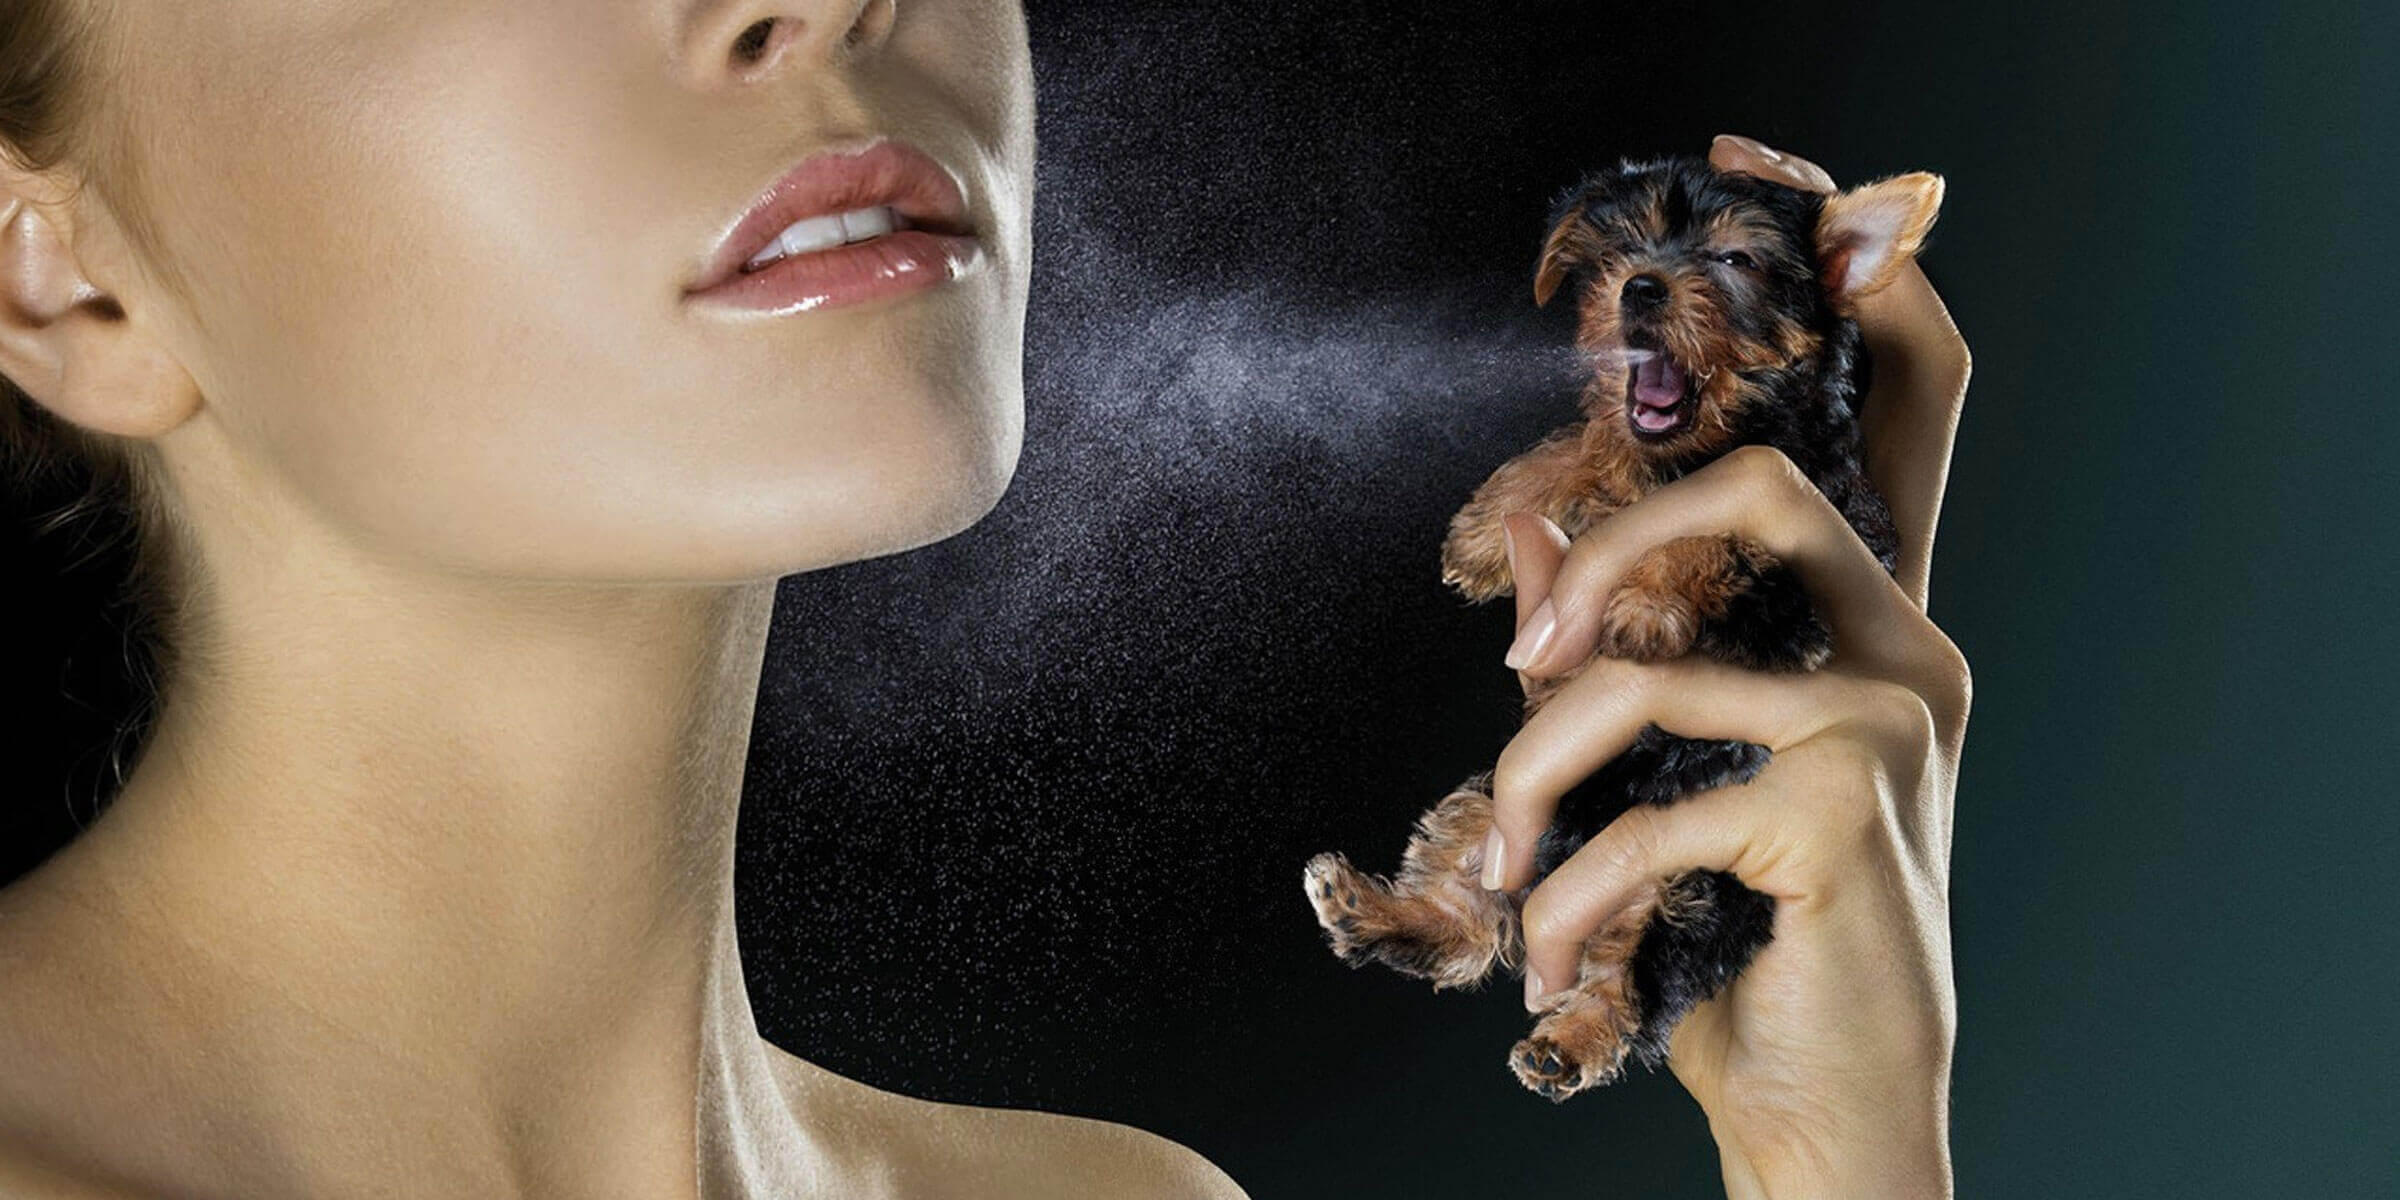 5 Best Dog Colognes, Perfumes and Deodorants for Dogs